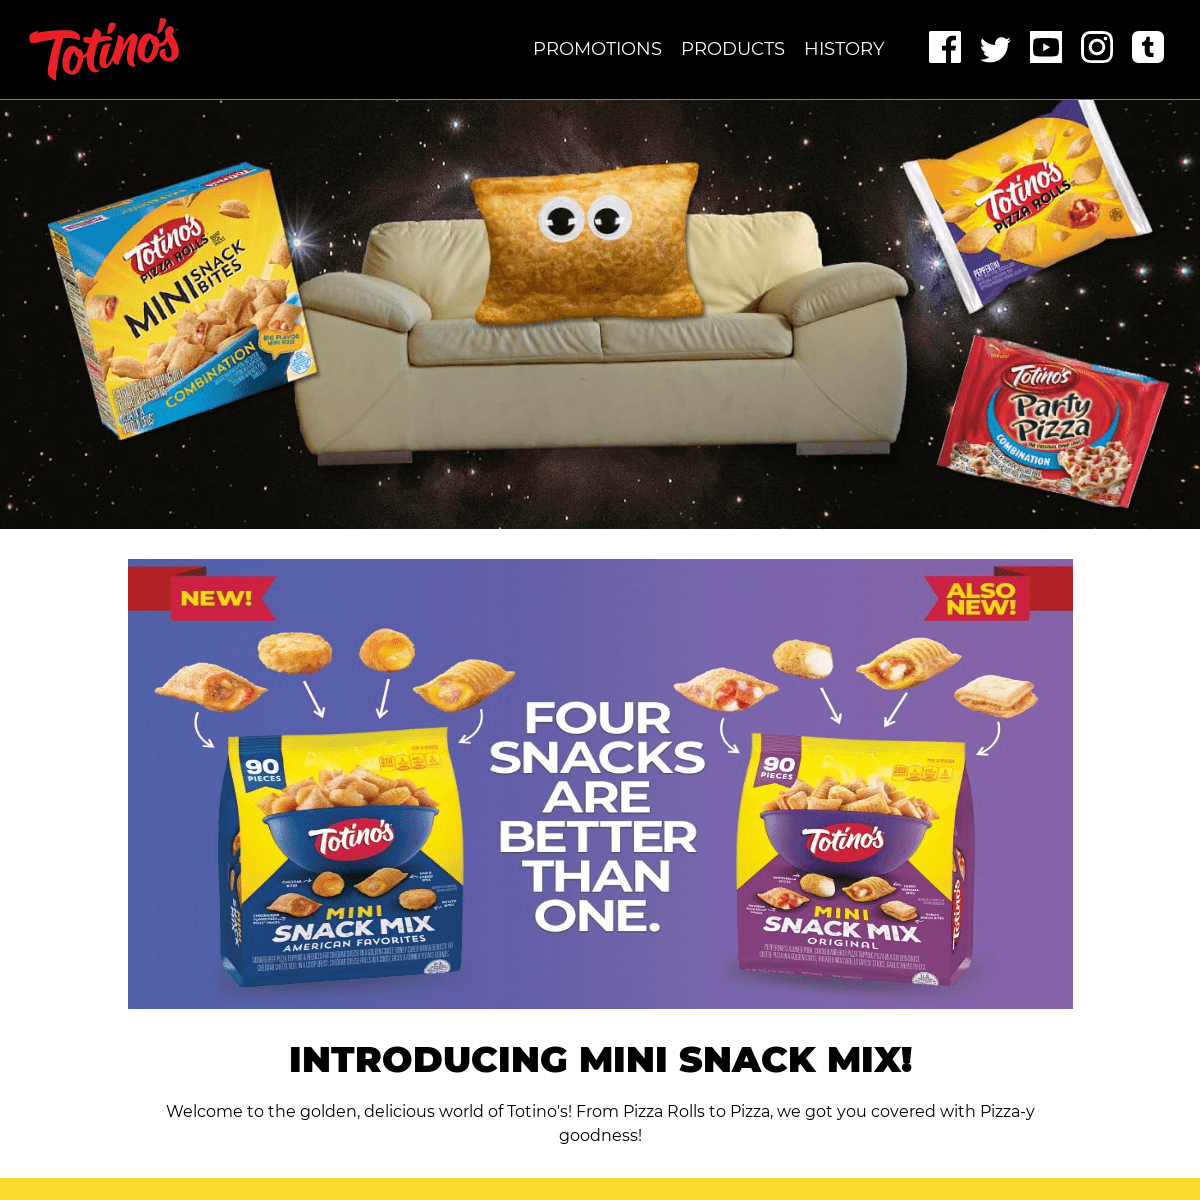 A complete backup of totinos.com